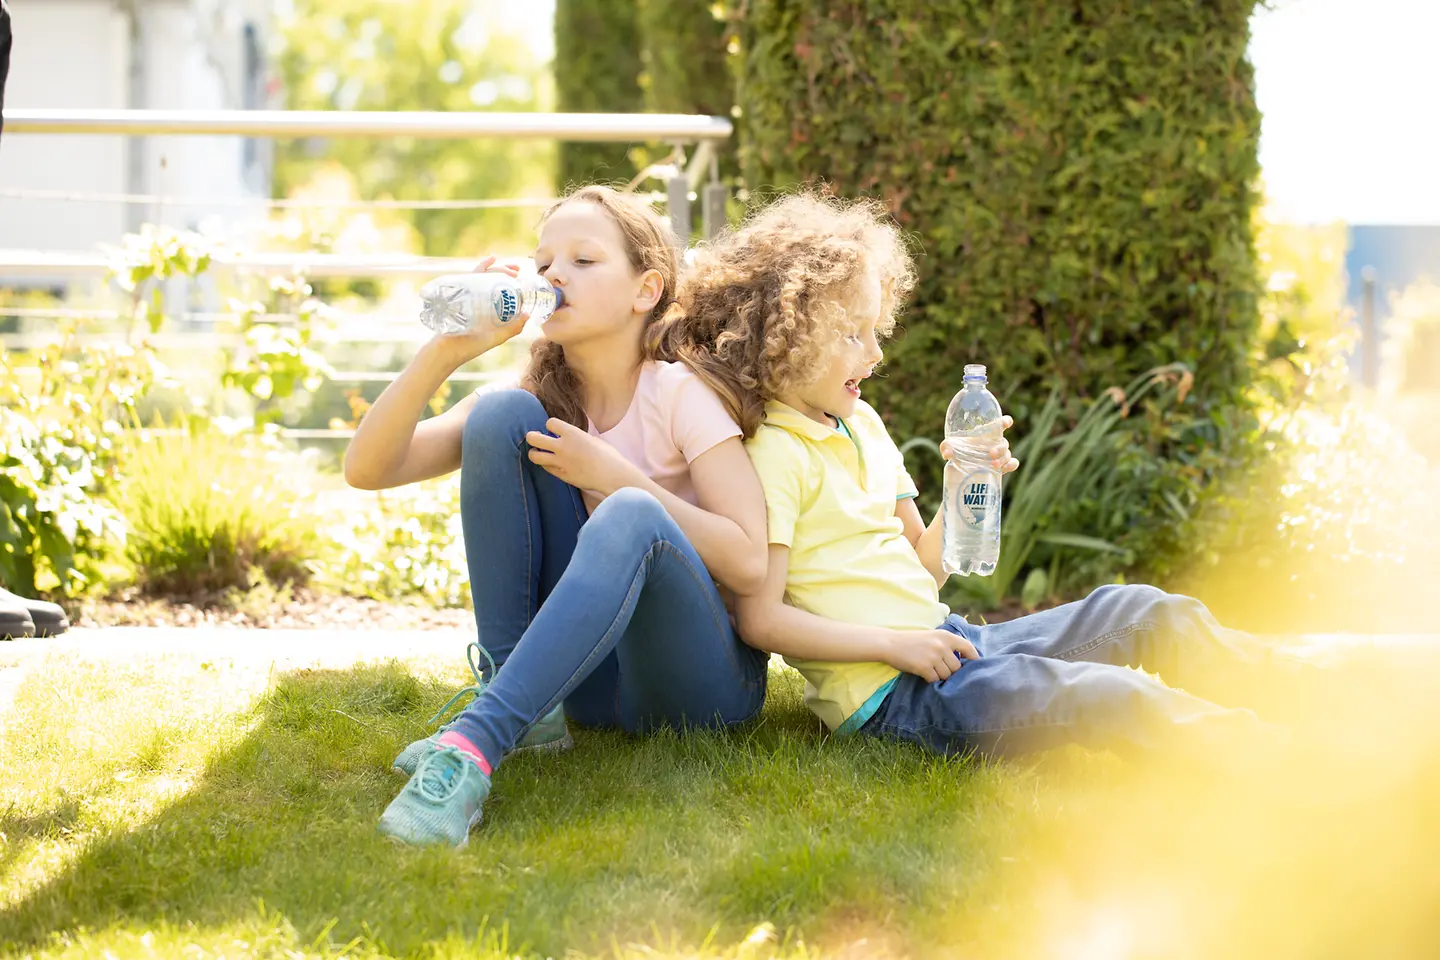 Two children drinking bottled water on the grass.